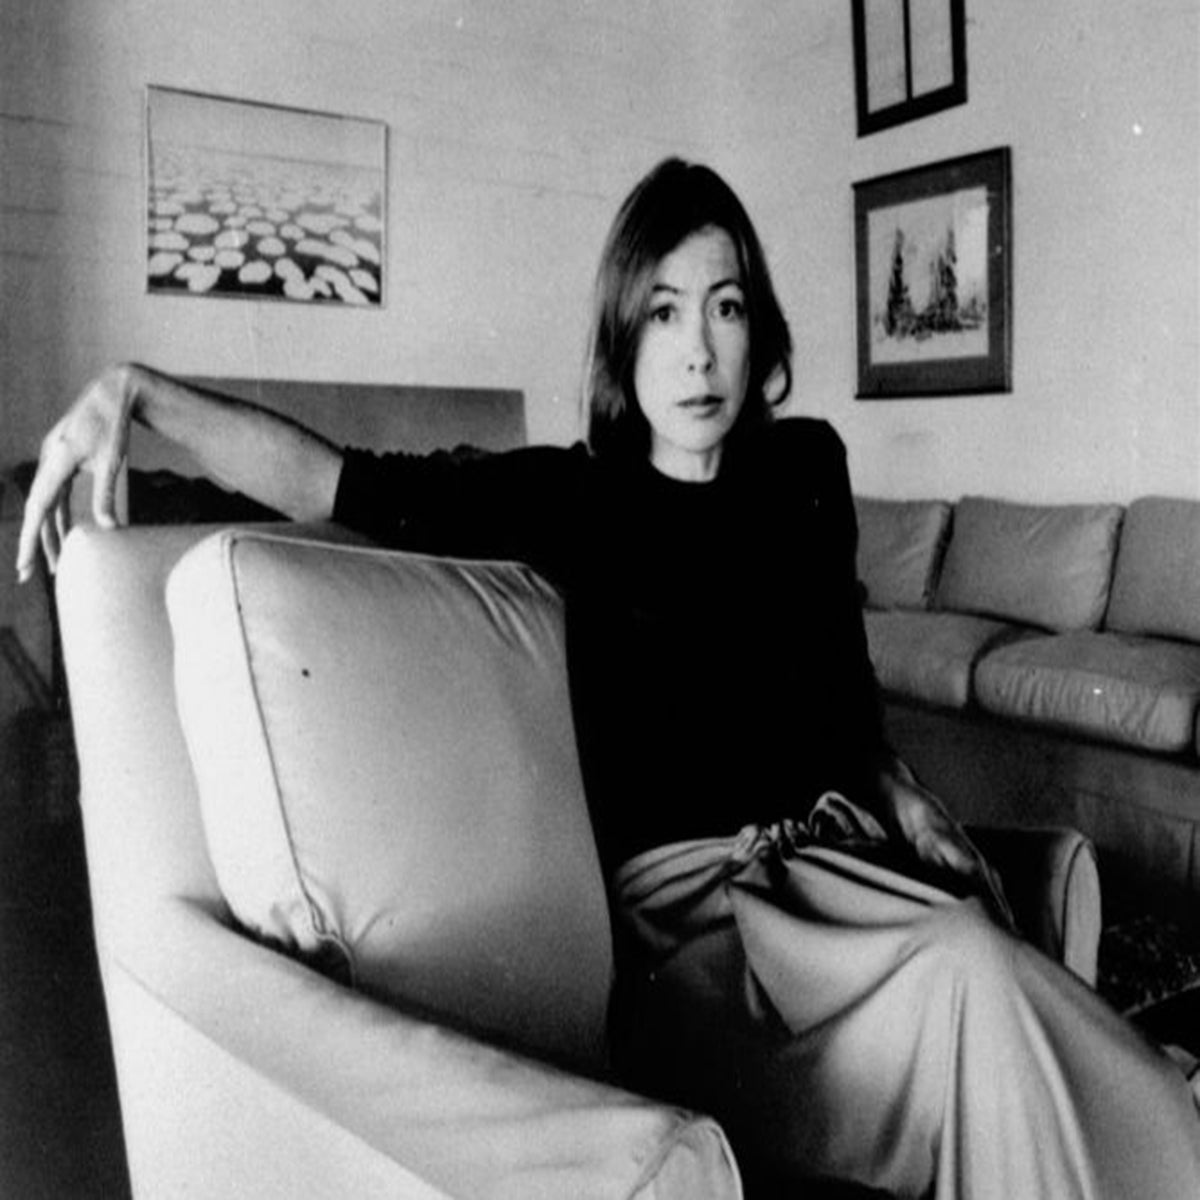 Knopf to Celebrate the Life of Joan Didion at a Public Service on